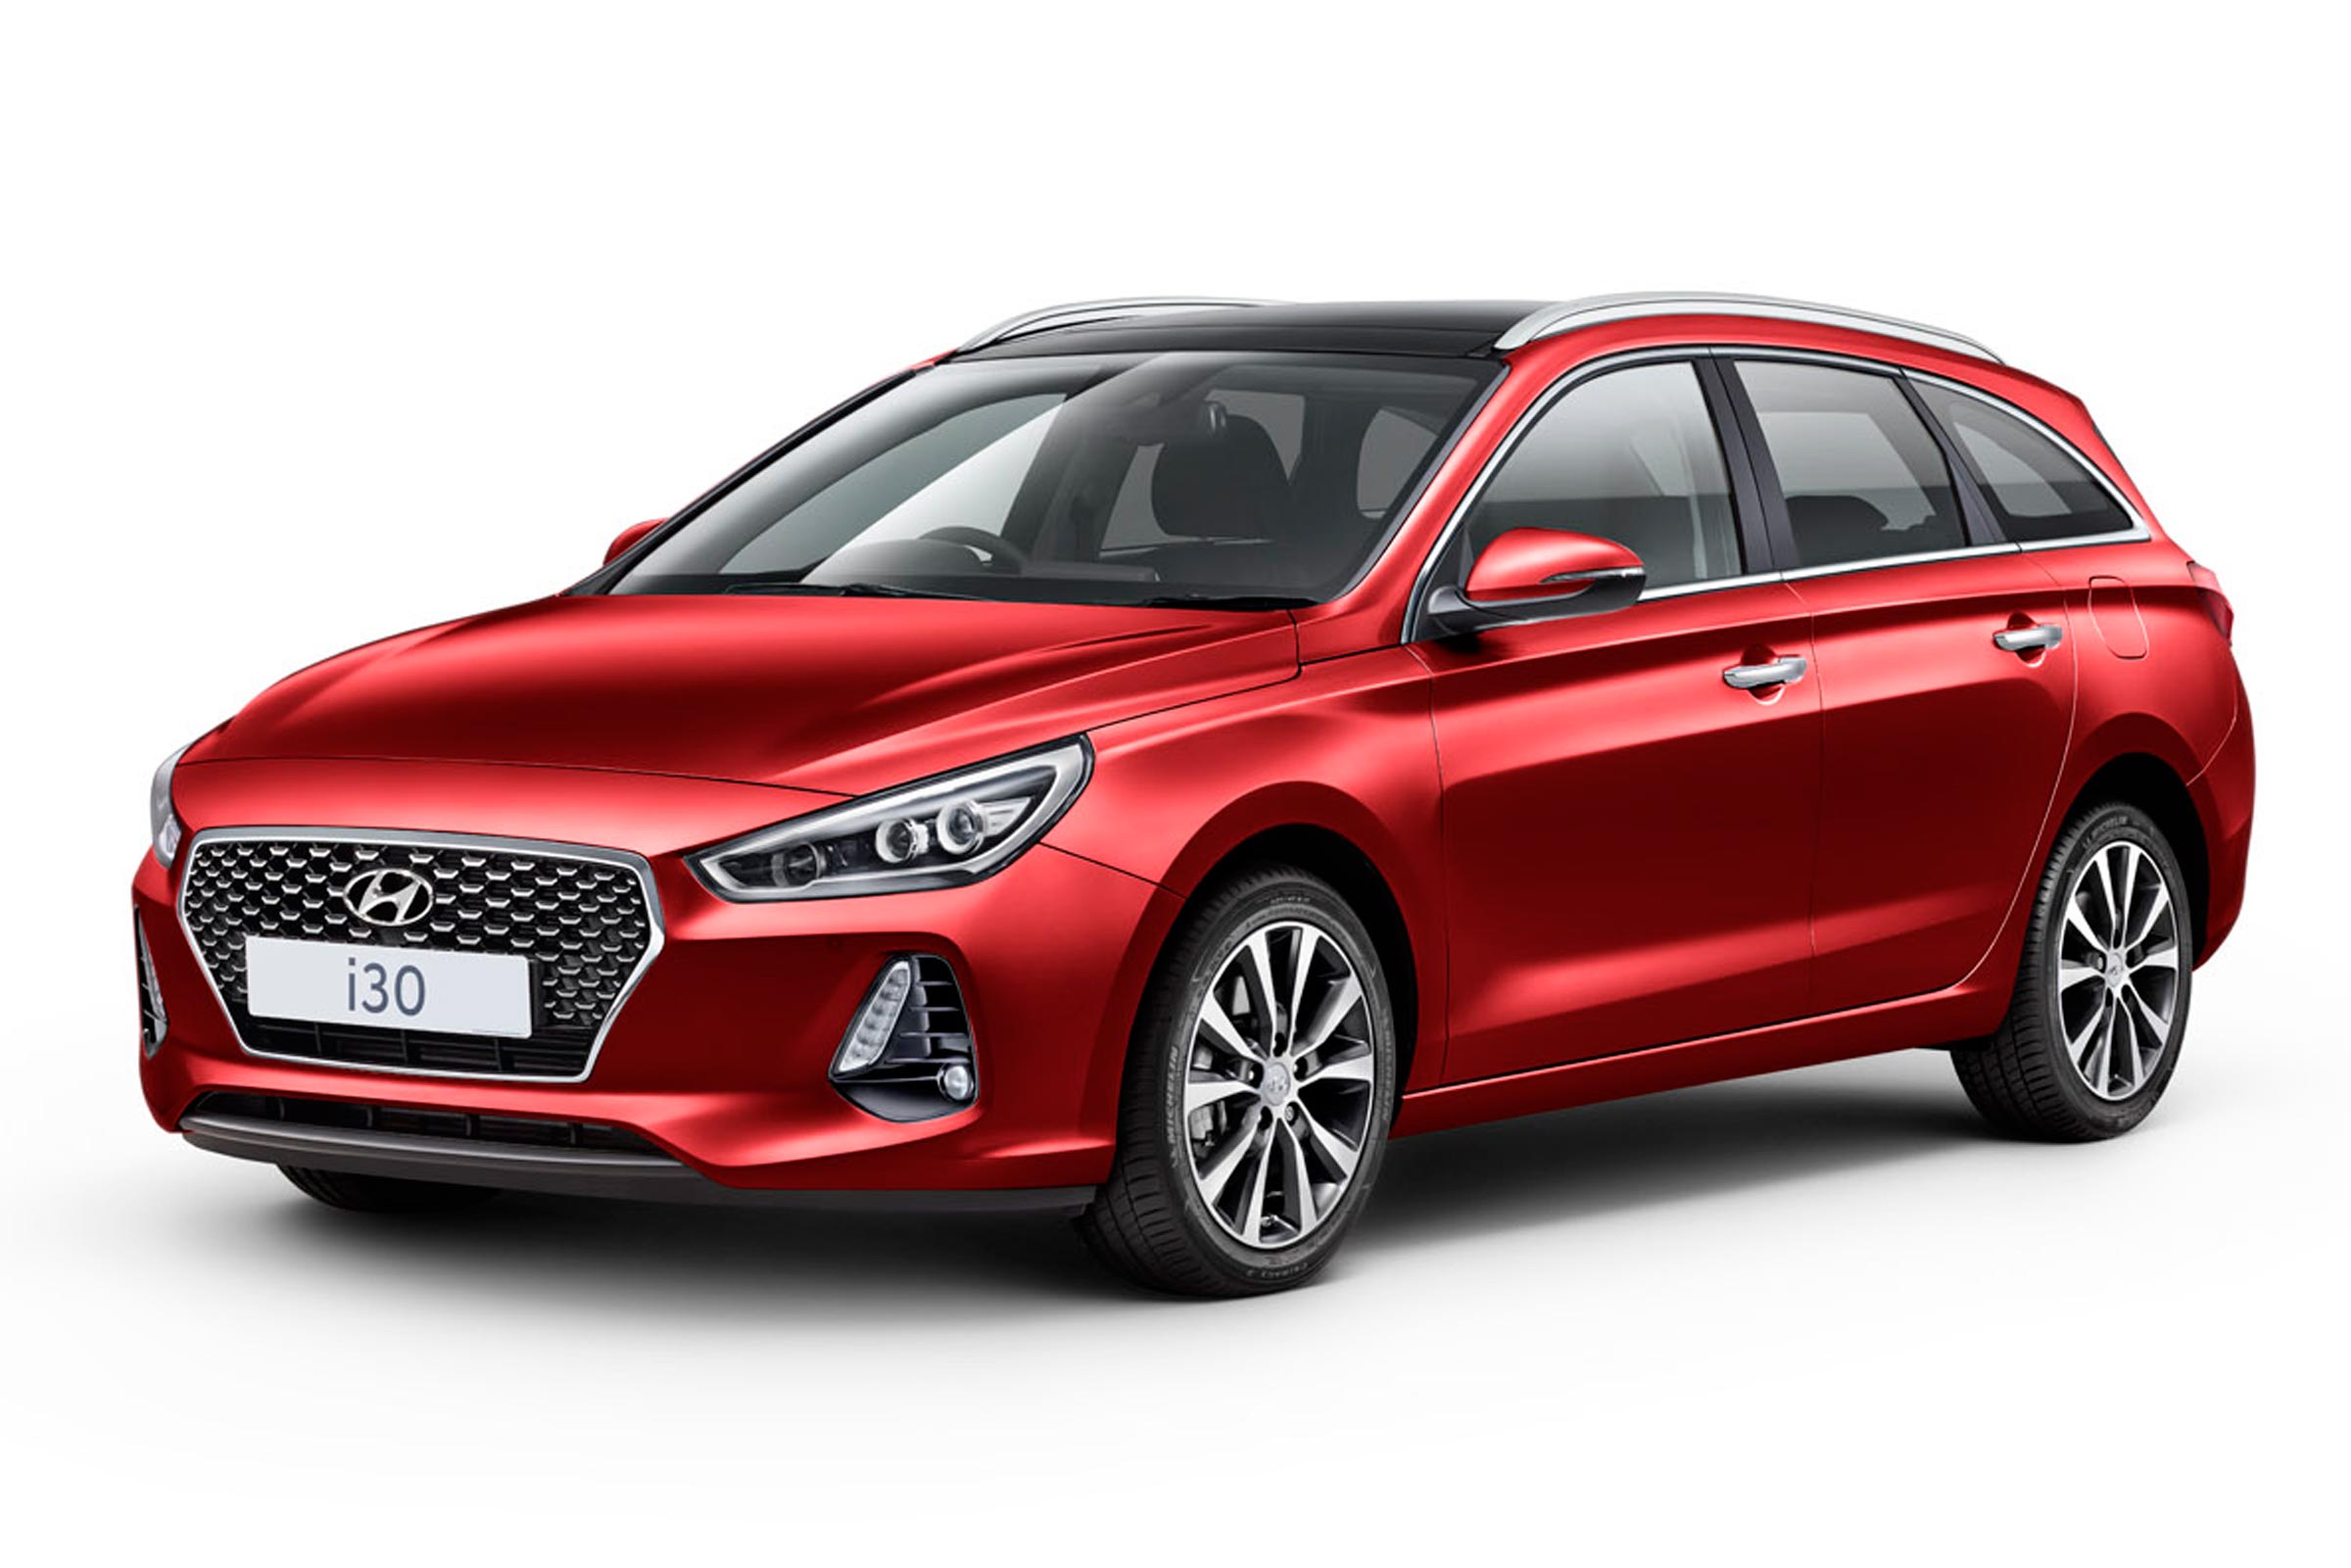 2017 Hyundai i30 Tourer prices, specs and release date